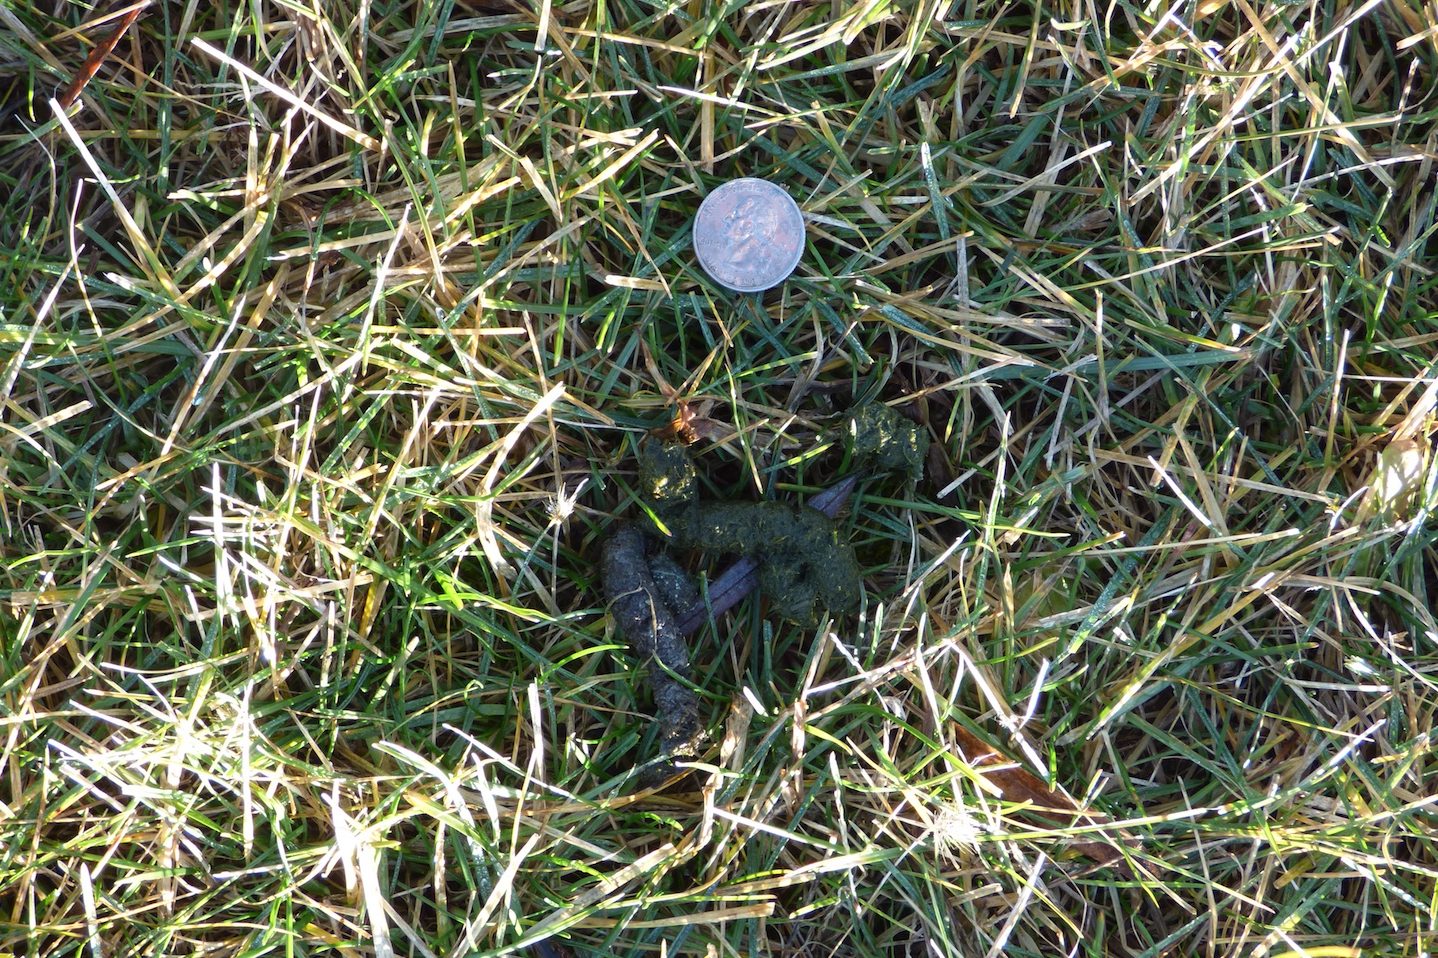 Canada goose droppings with a quarter near for size comparison.